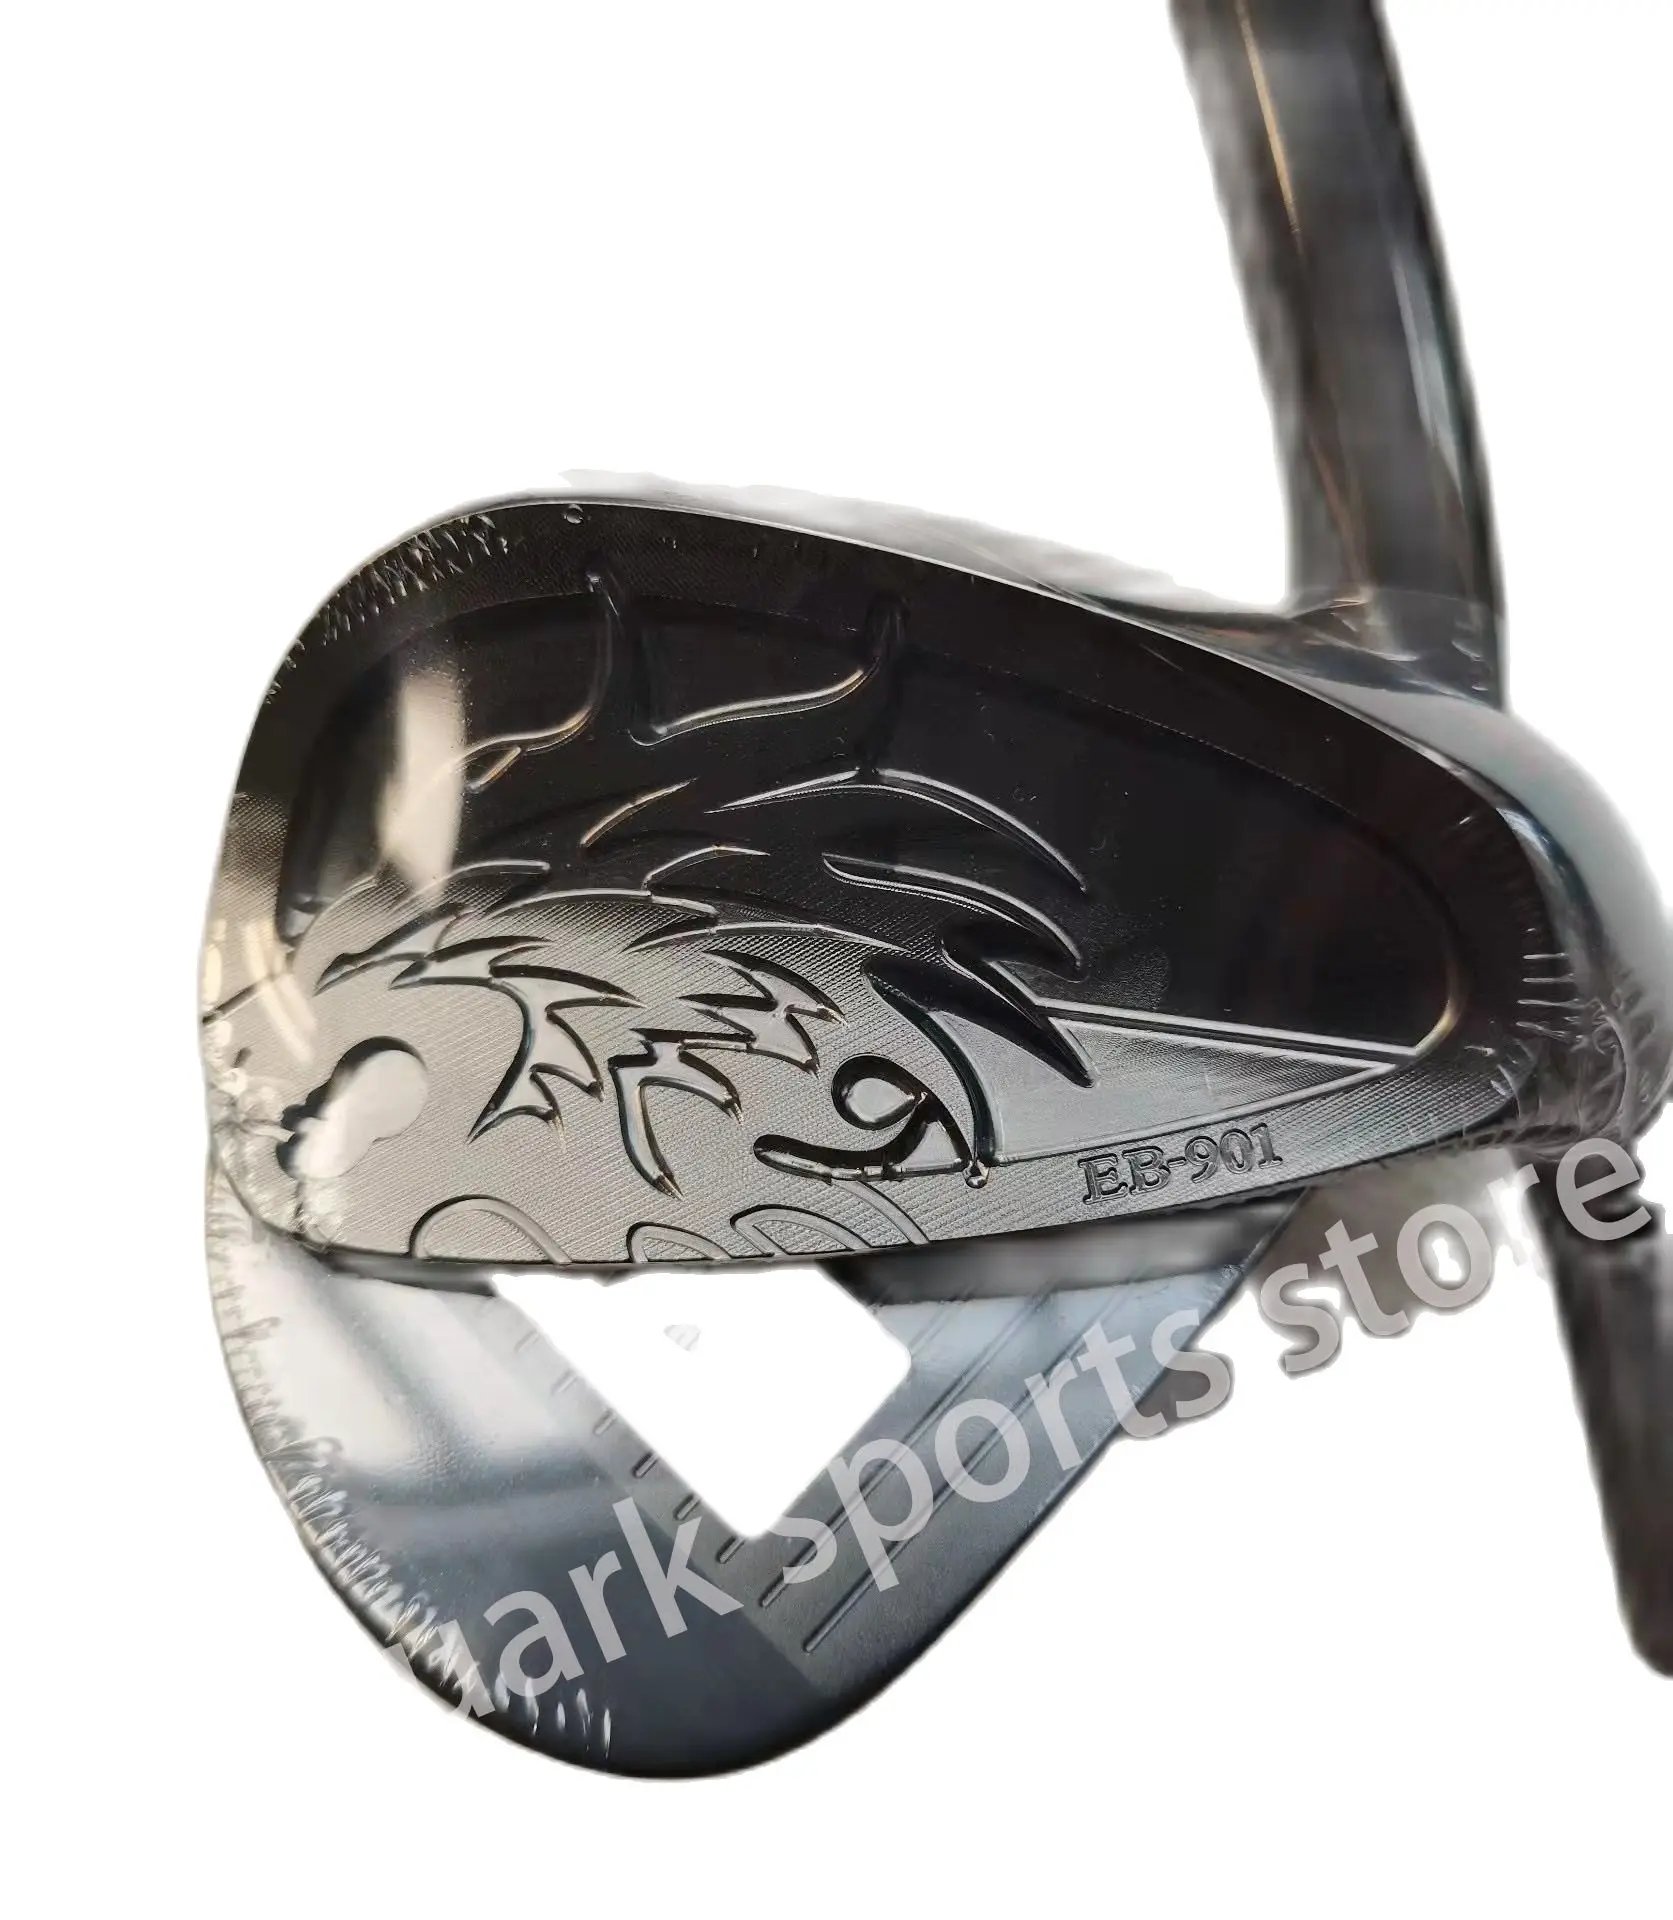 

New Golf Irons Clubs EMILLID BAHAMA EB-901 Golf Irons Set Black Or Sliver Colour Forged Limited Golf Iron Head Free Shipping